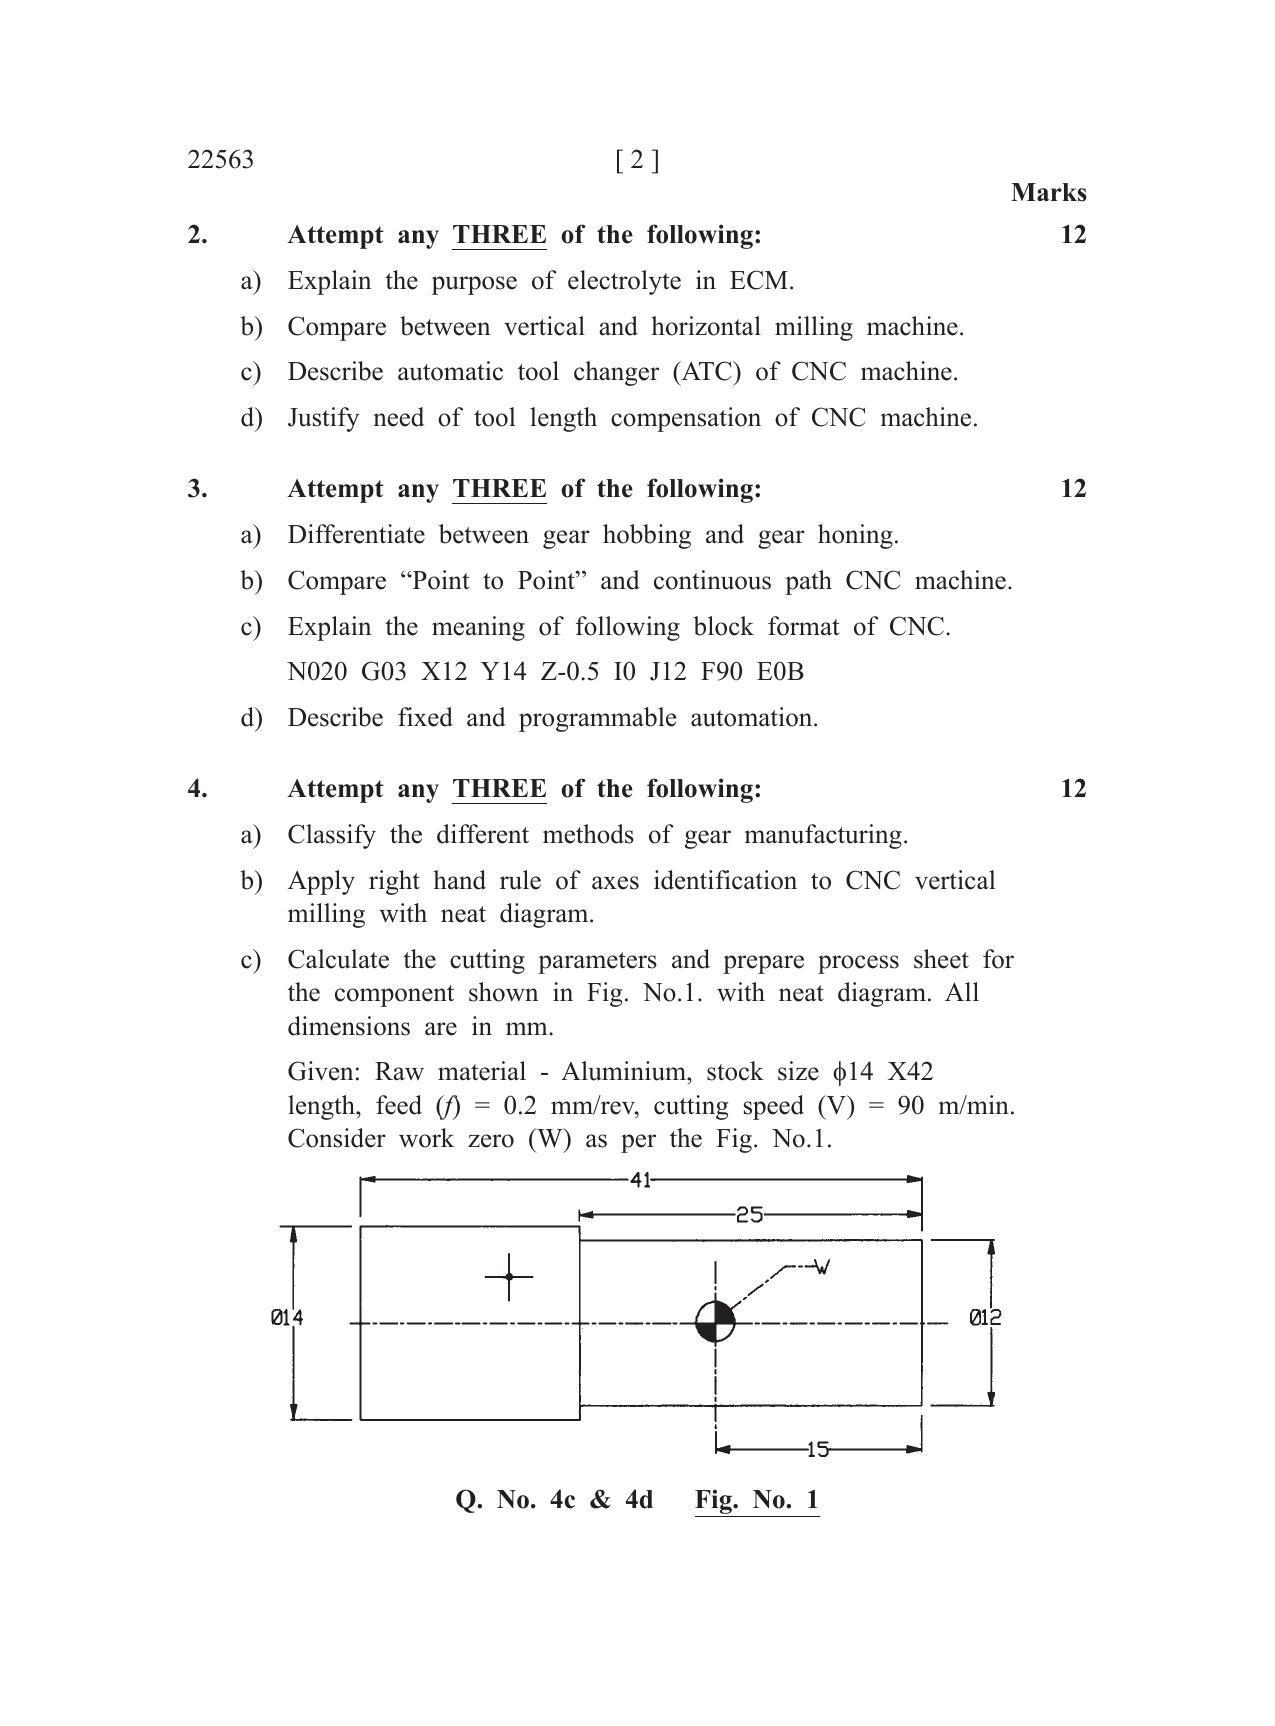 MSBTE Question Paper - 2019 - Advanced Manufacturing Processes - Page 2